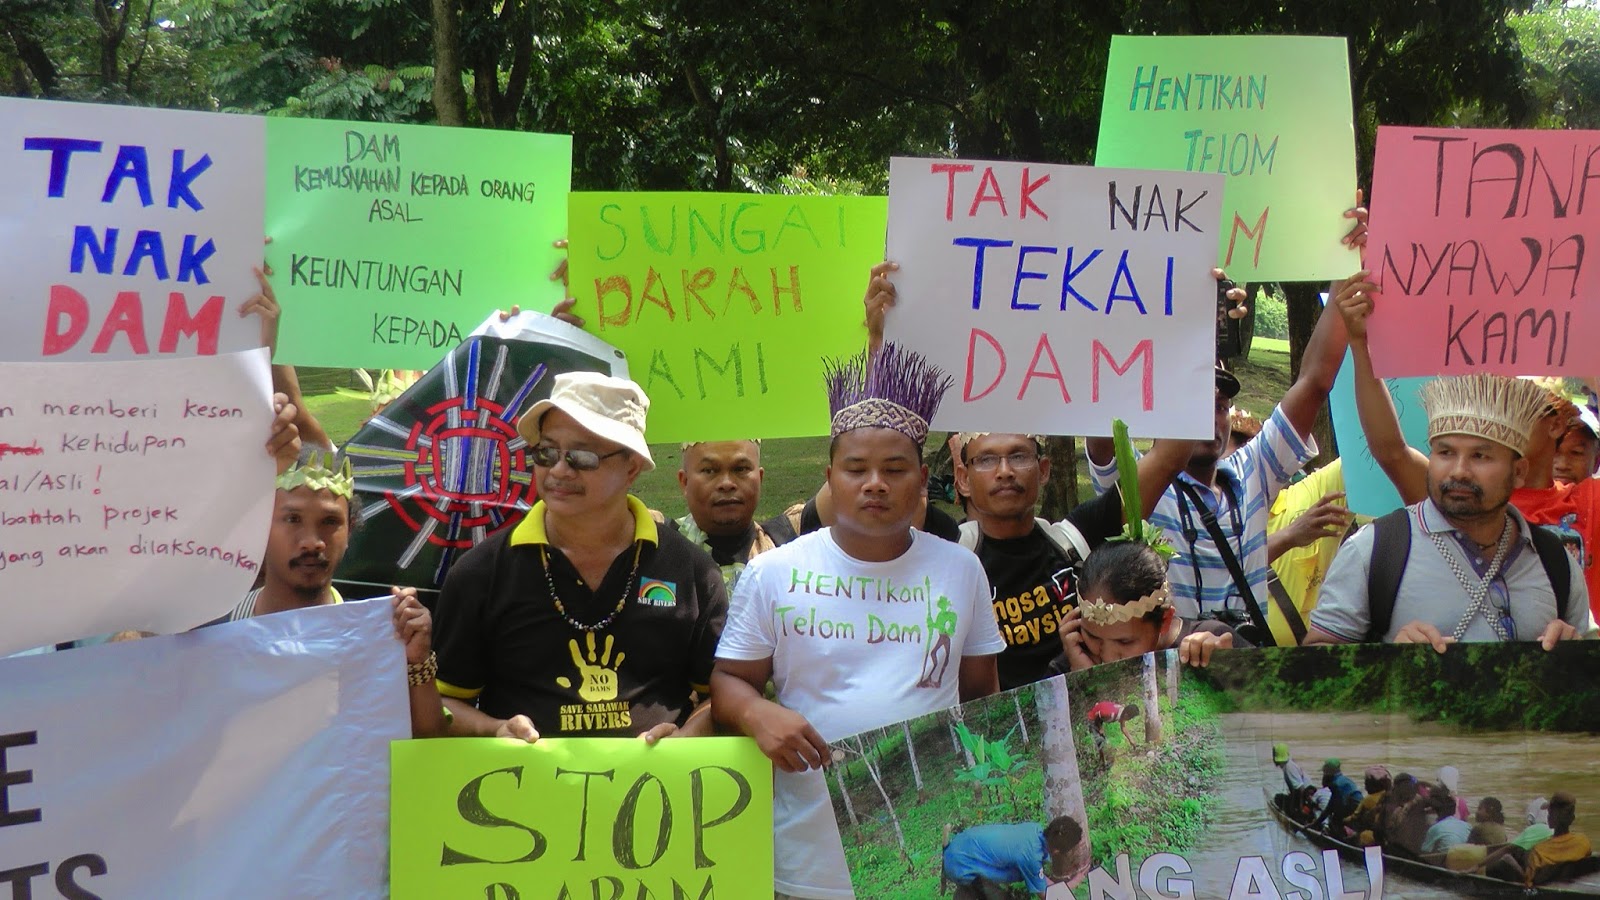 Orang asli protest against all sort of dam projects. Img from Orang Asli Post blogspot